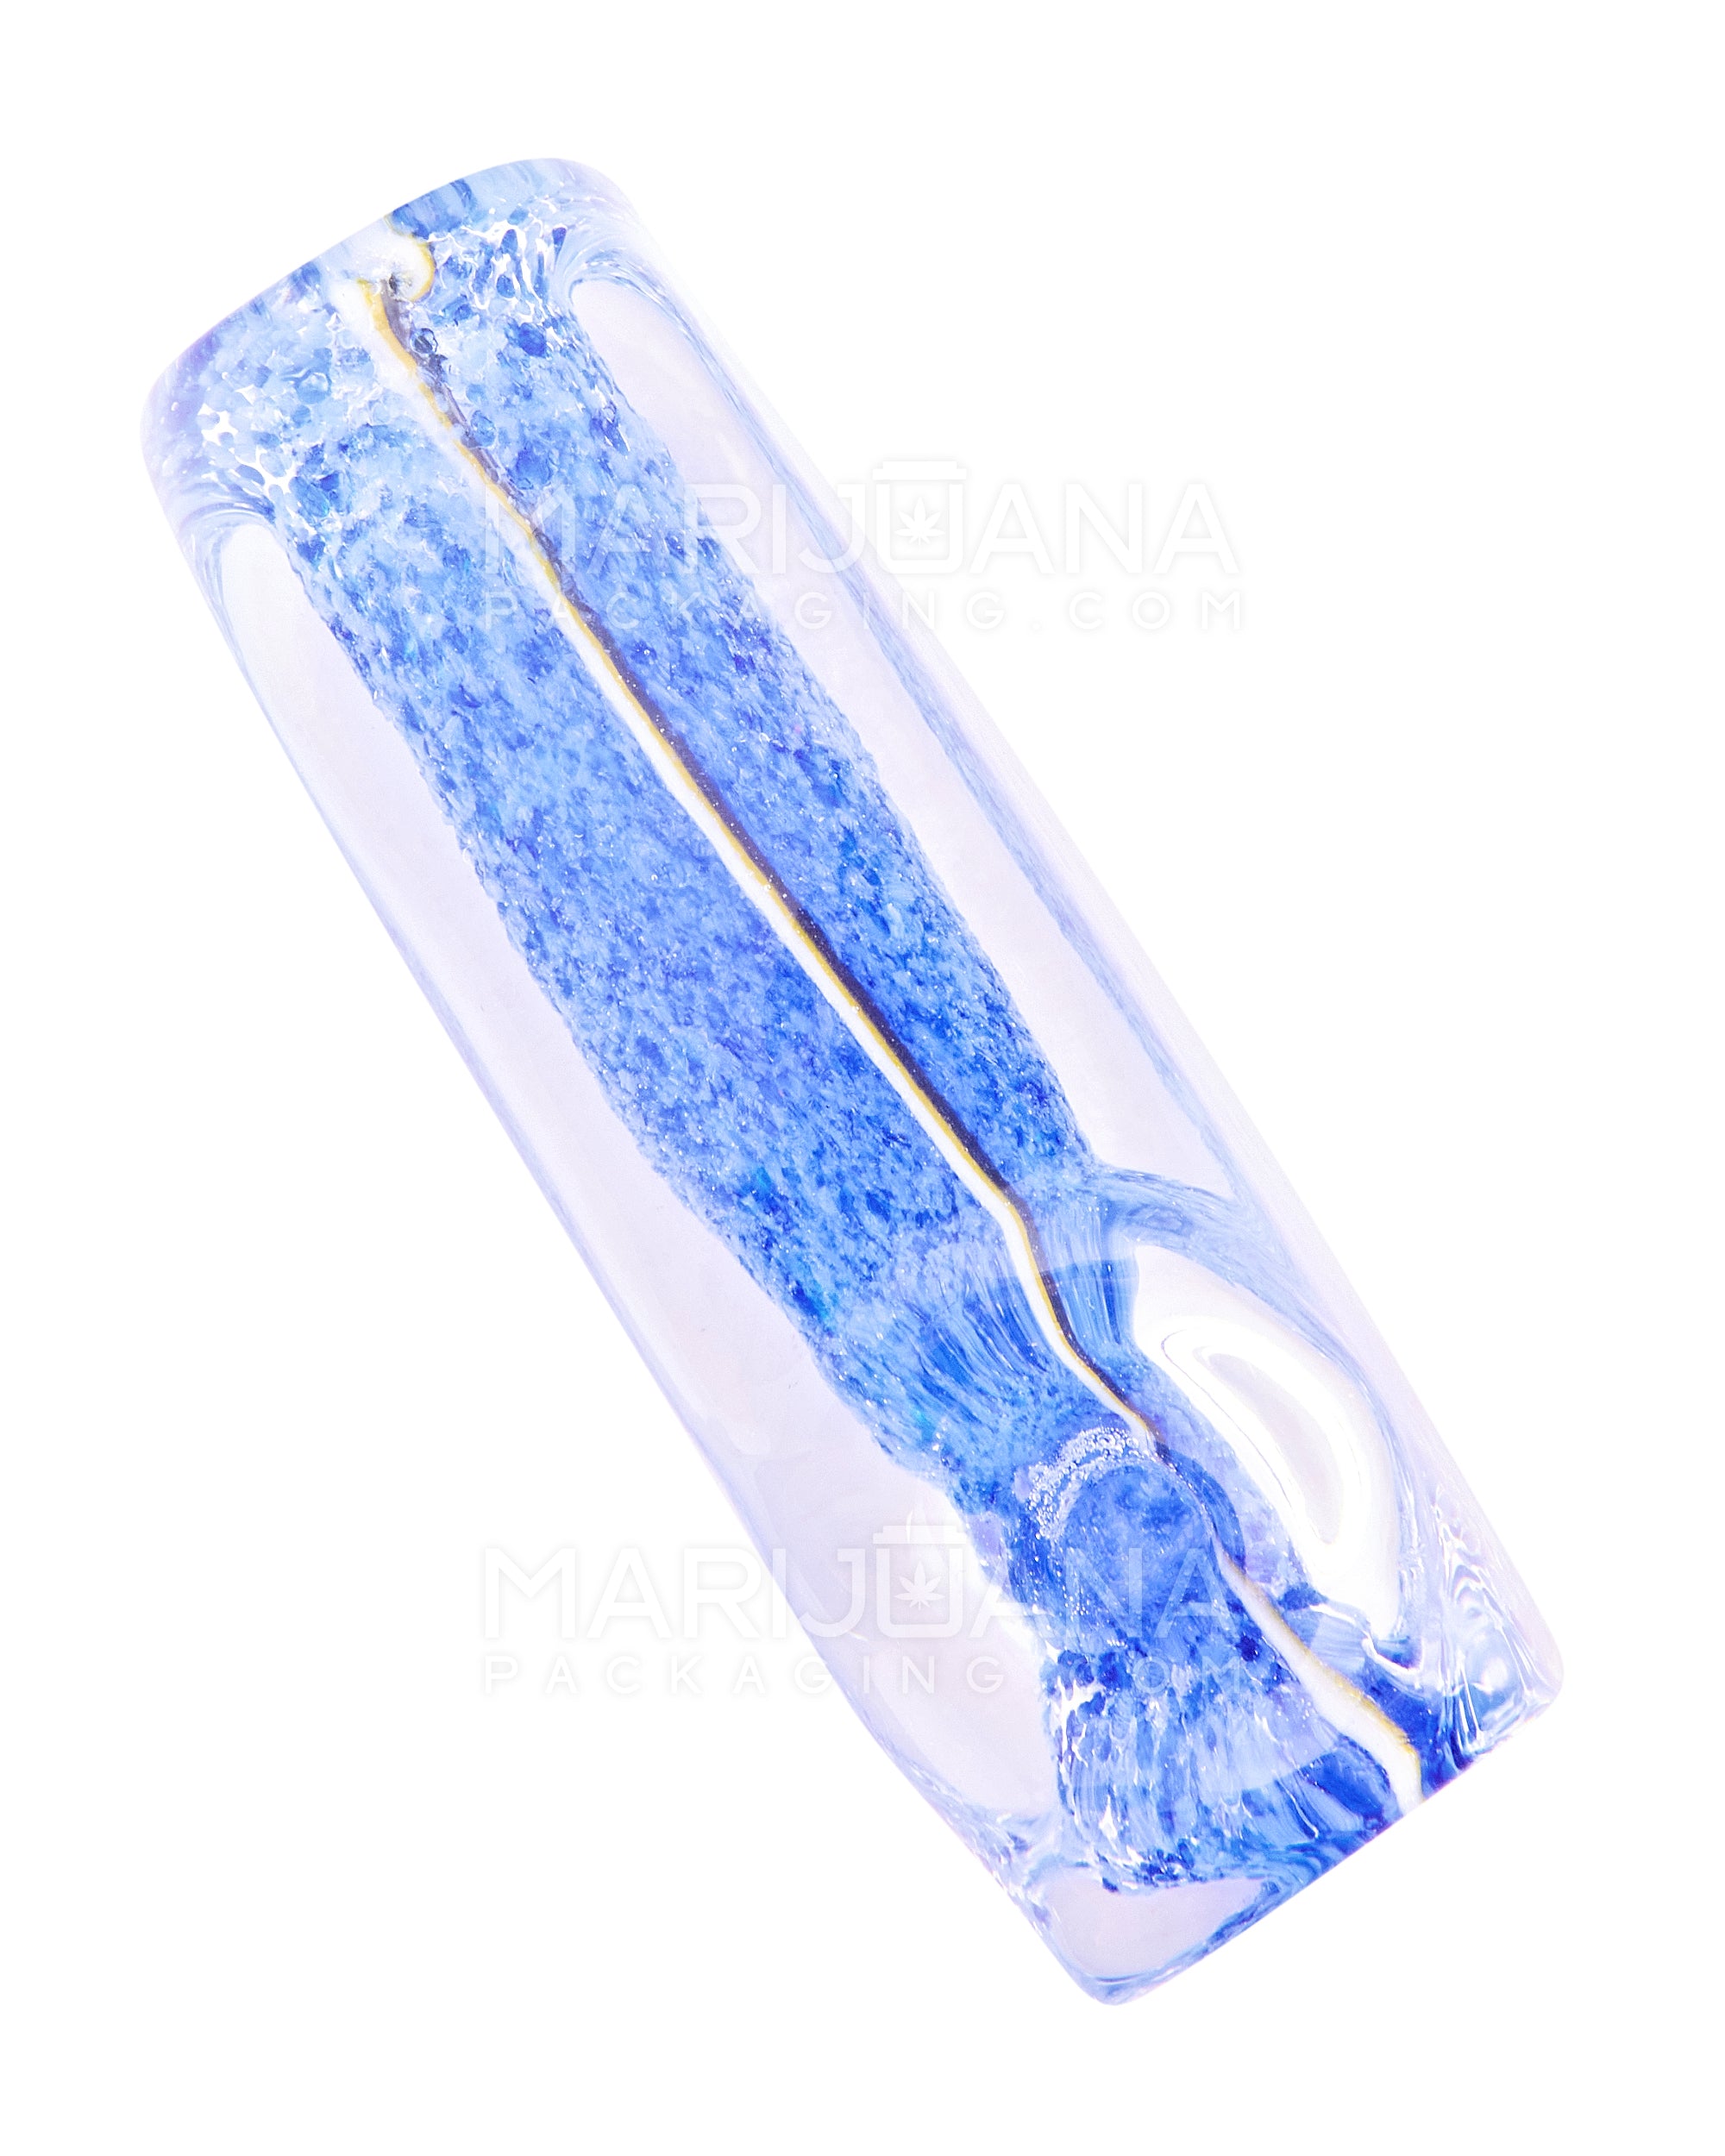 Frit & Striped Rectangle Spoon Hand Pipe | 2.5in Long - Glass - Assorted